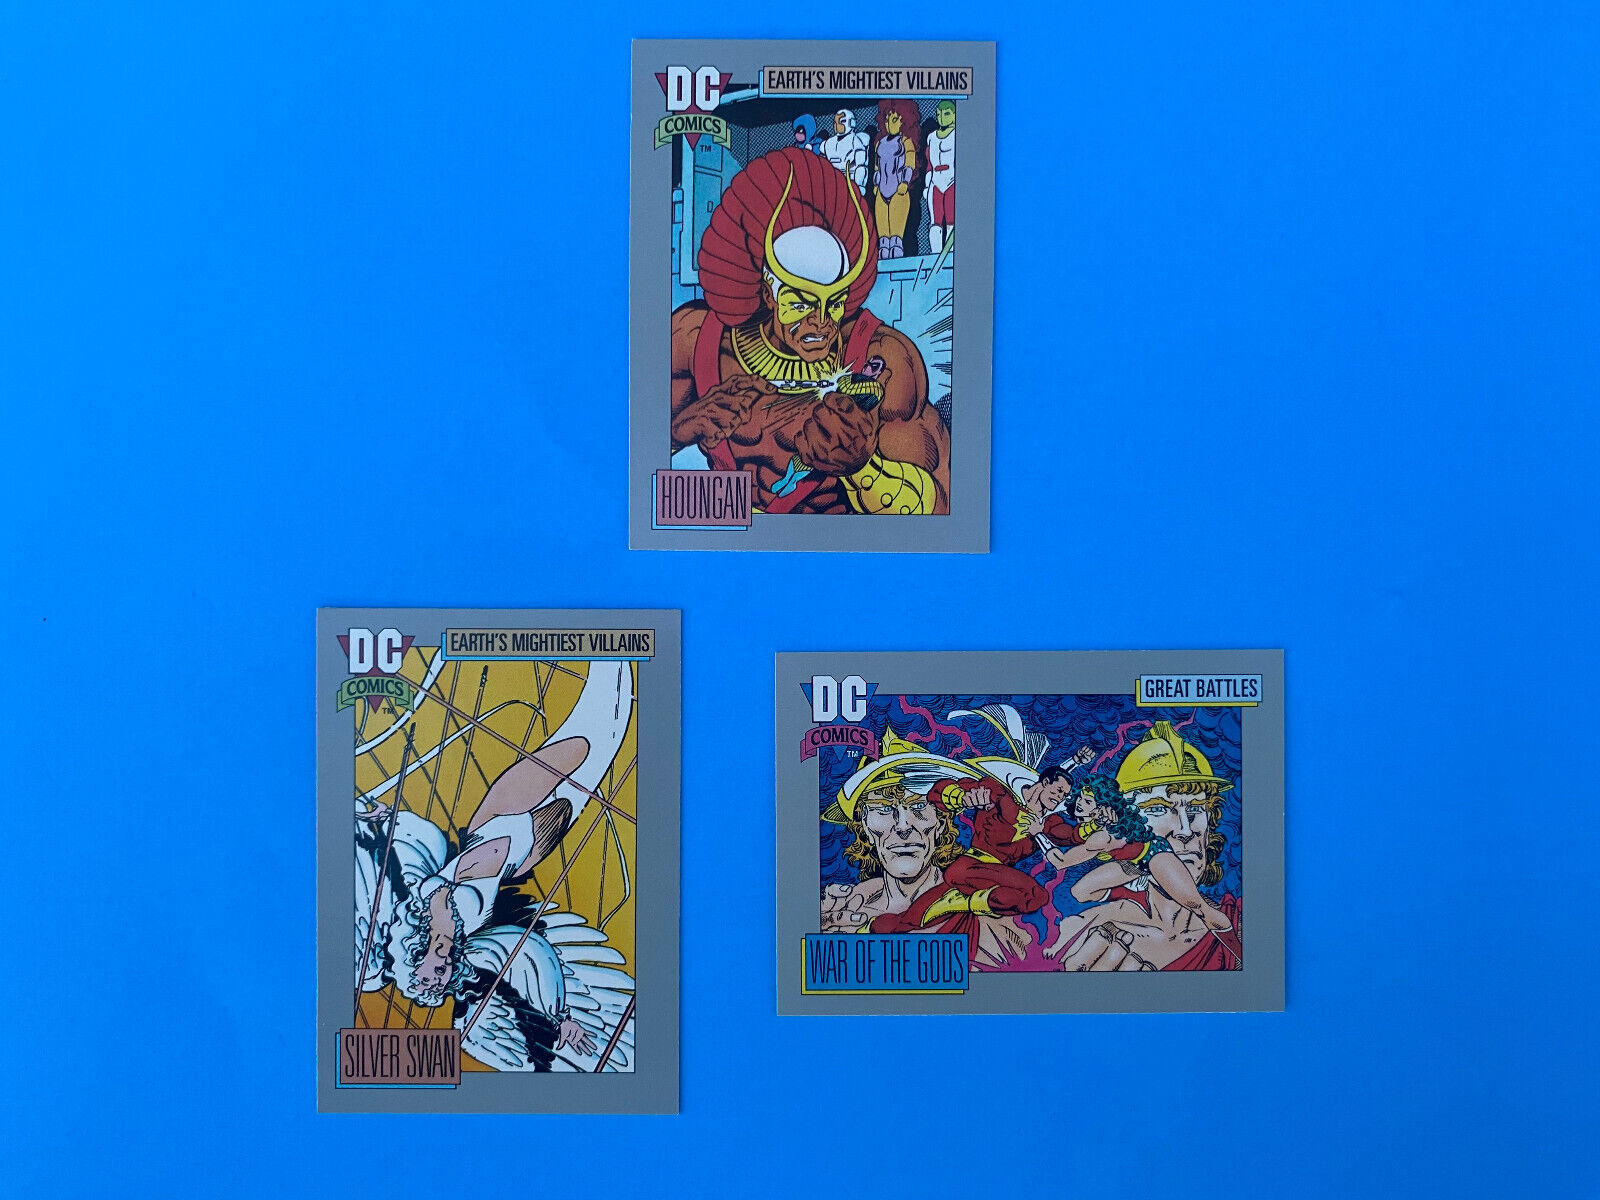 1991 DC UNIVERSE COMICS CARDS - SERIES 1 - LOT OF 3 - COLLECT THEM ALL